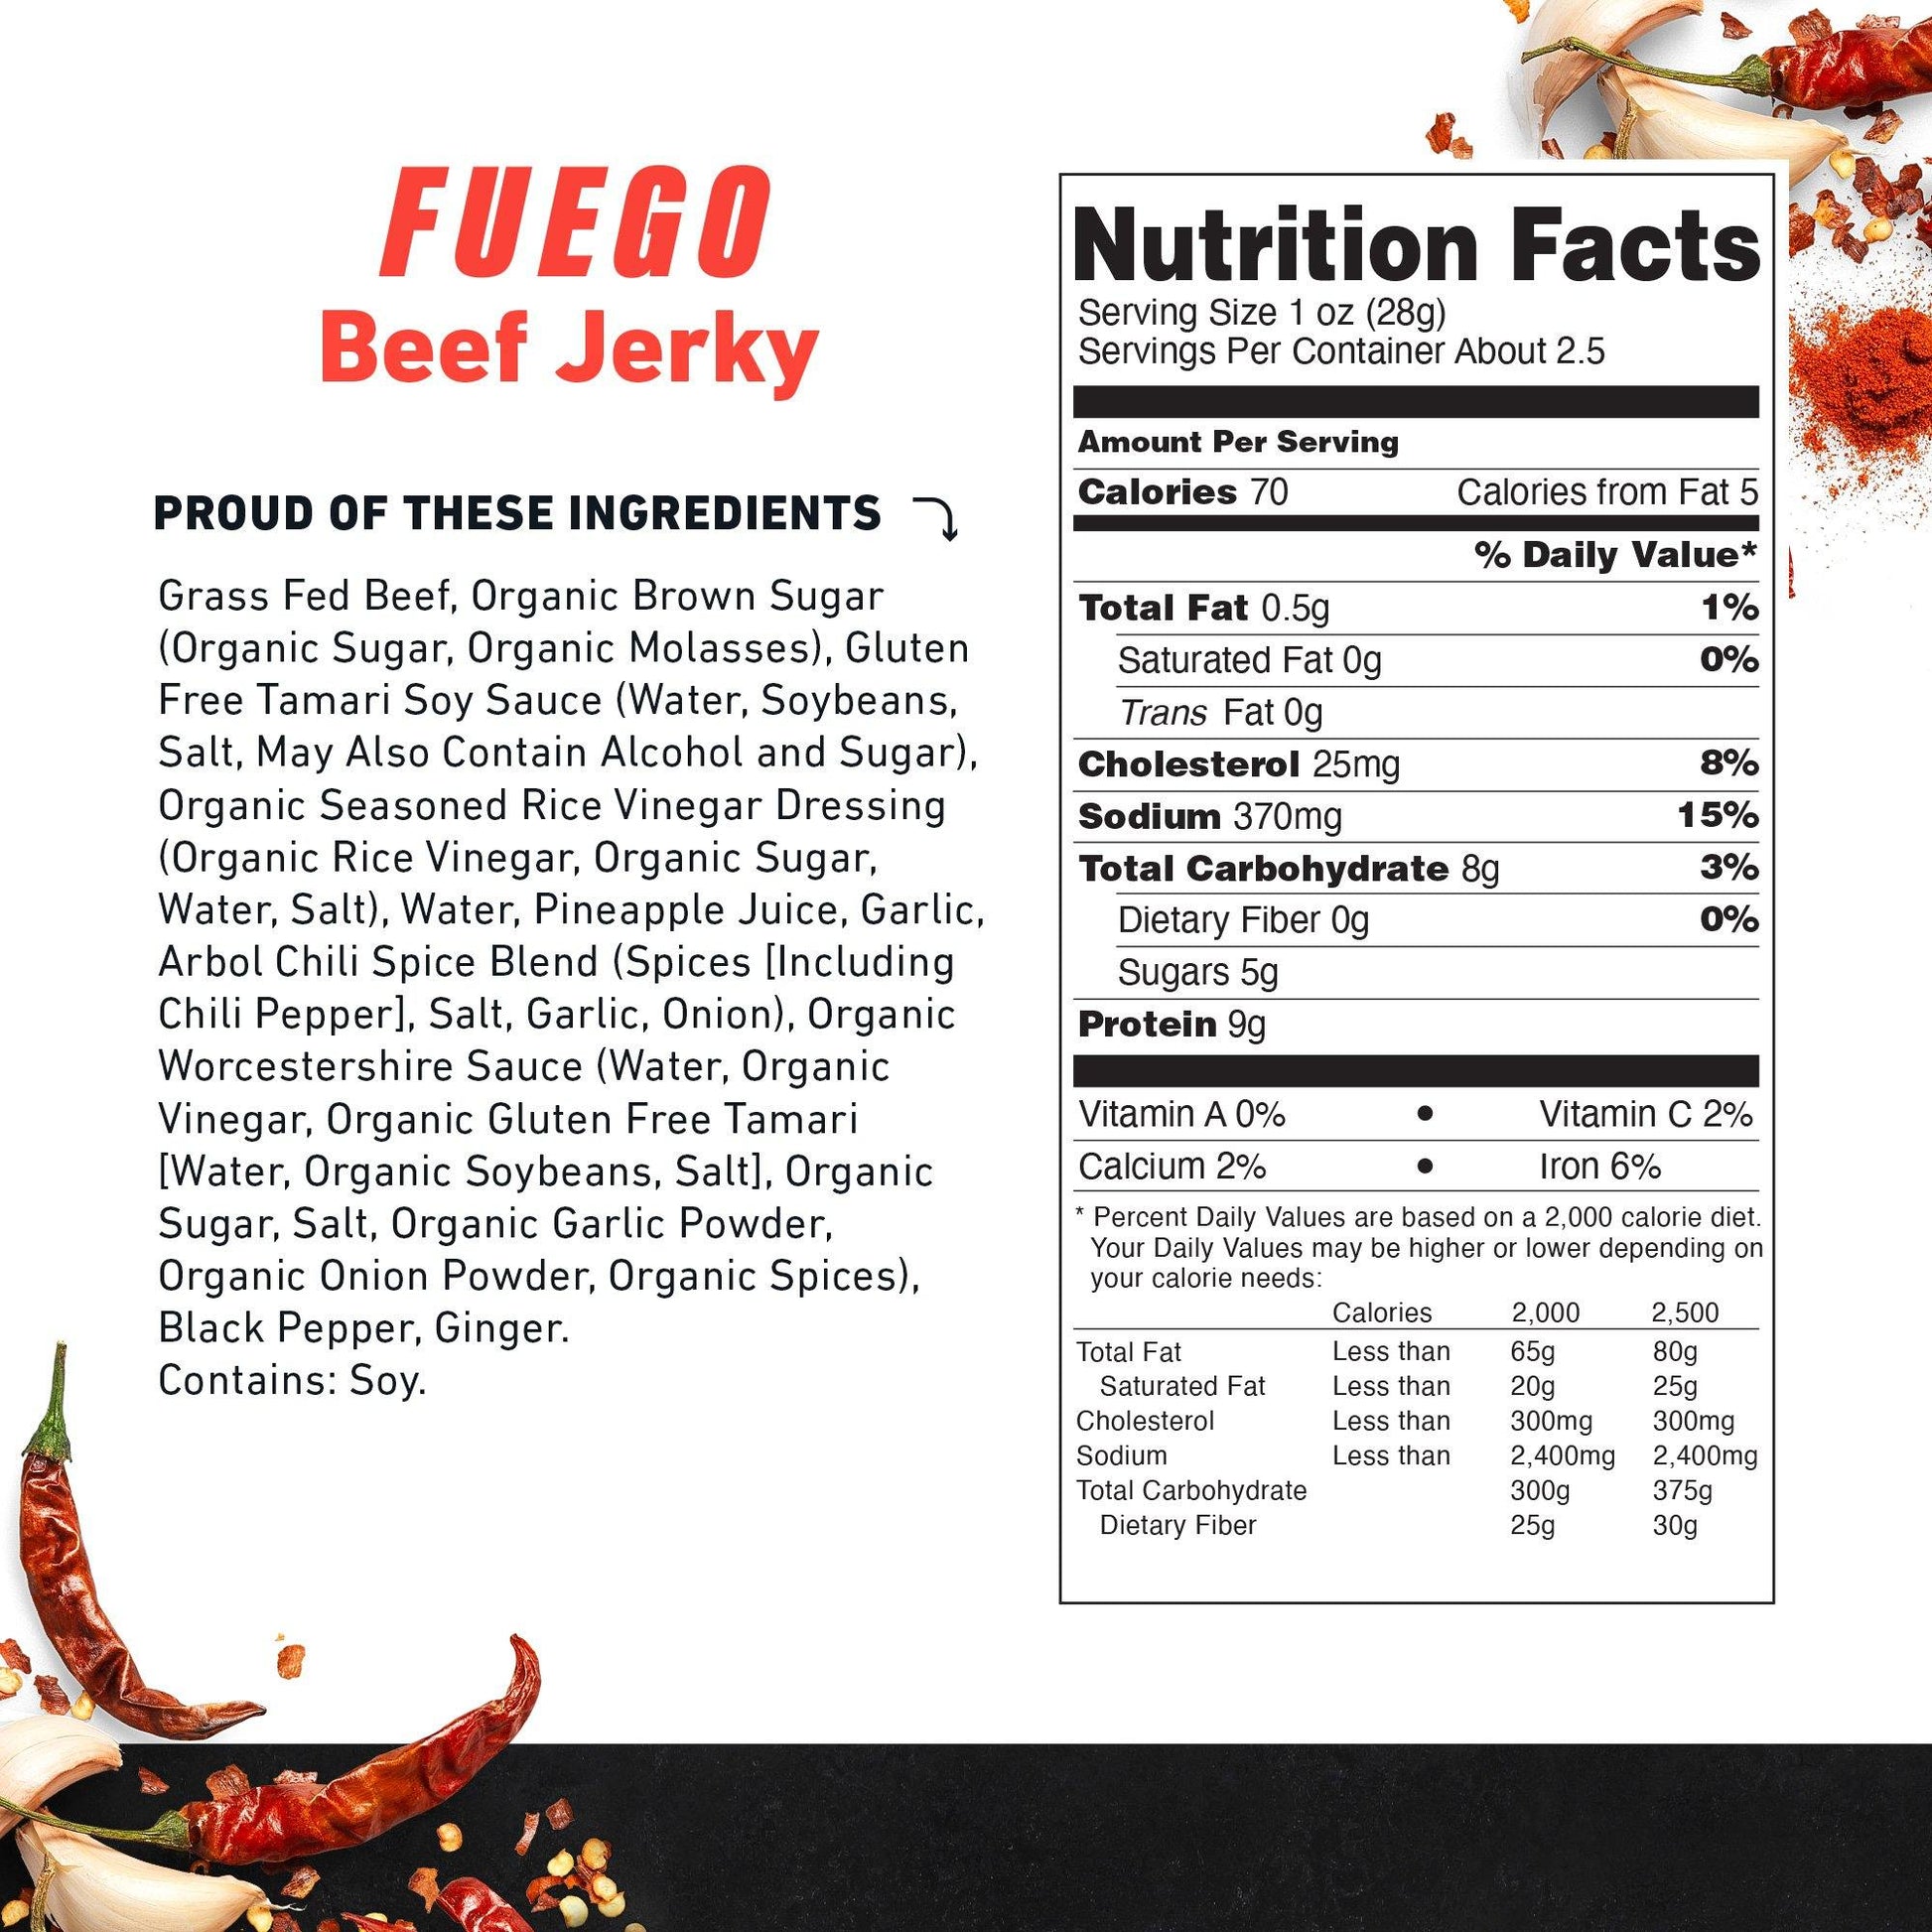 Country Archer Grass-Fed Beef Jerky Fuego 2.5 oz